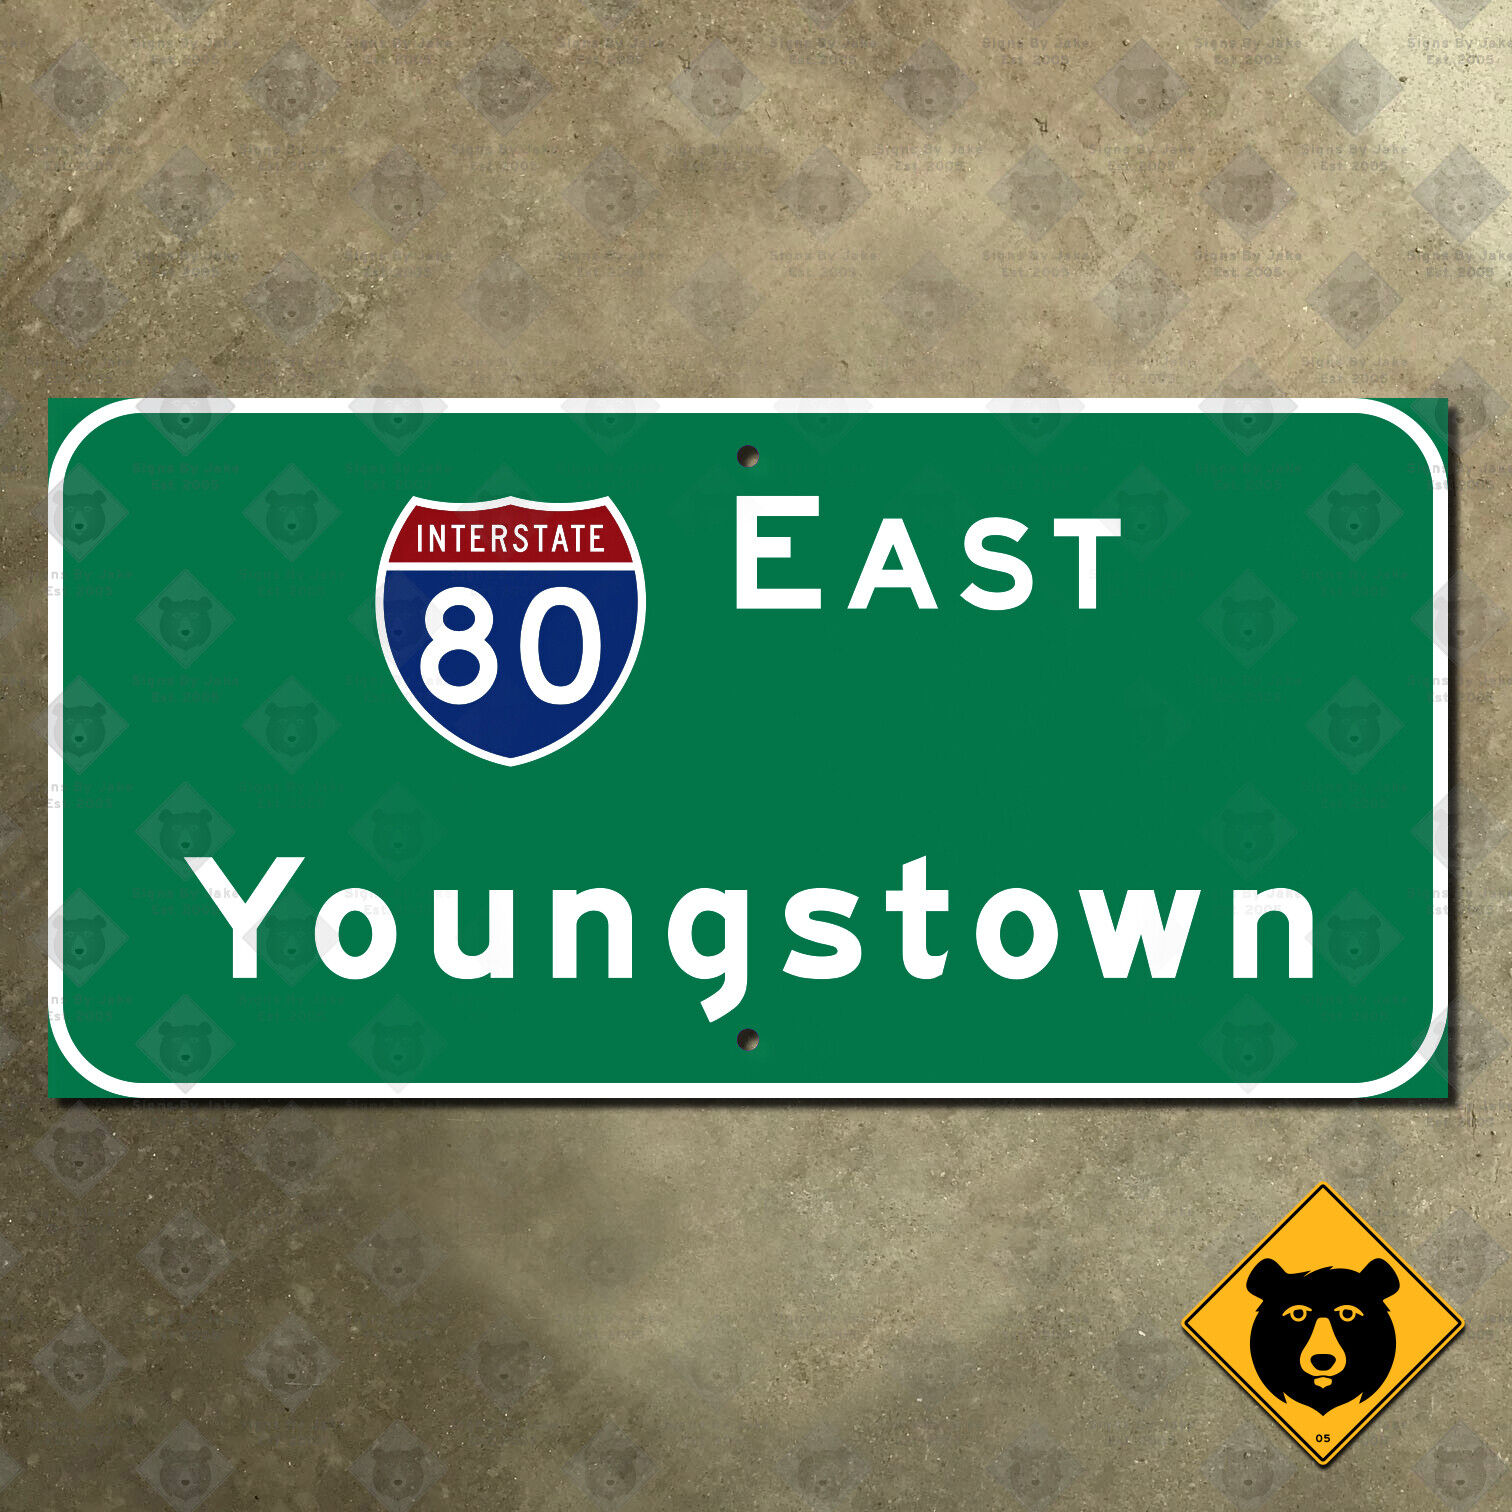 Ohio Interstate 80 east Youngstown highway road sign 24x12